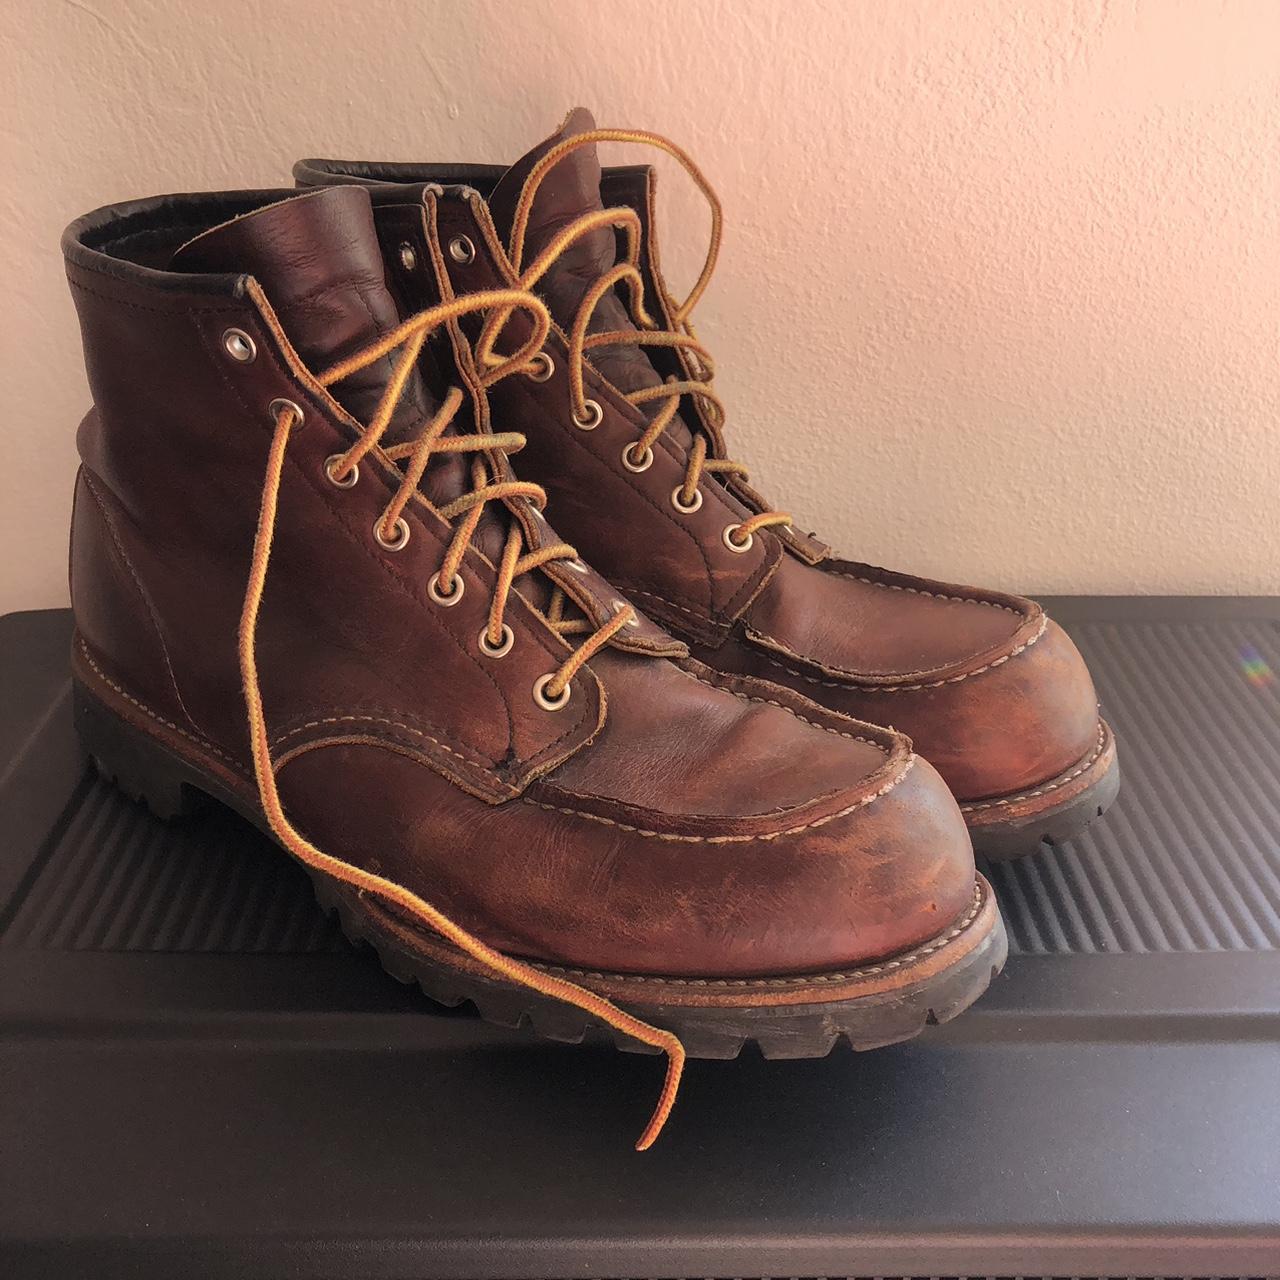 Redwing Men's Burgundy and Brown Boots